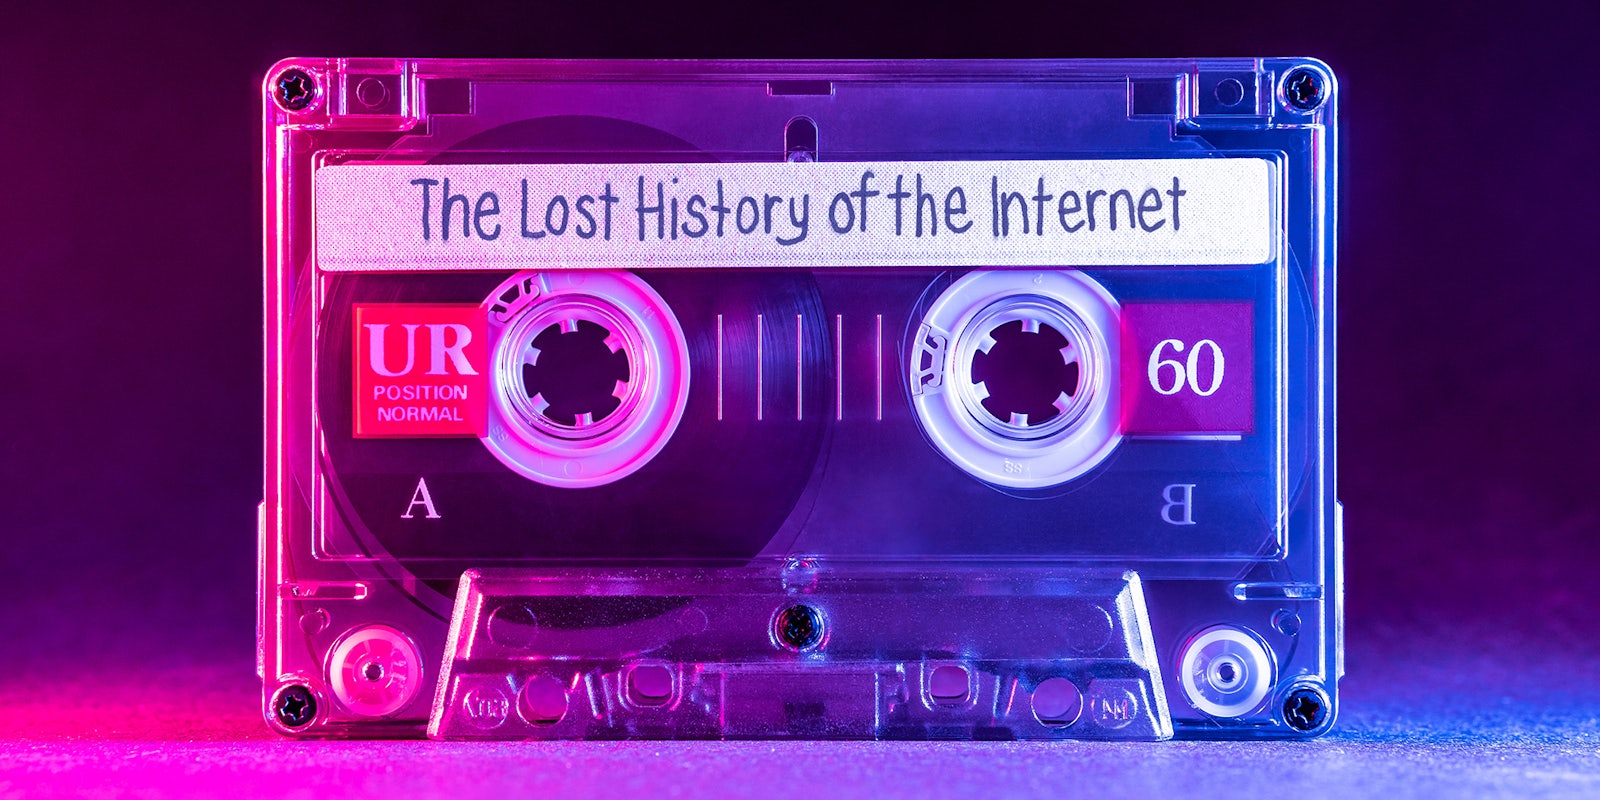 Transparent audio cassette tape lit by pink and blue lamps on a black background with 'The Lost History of the Internet' written on the label.